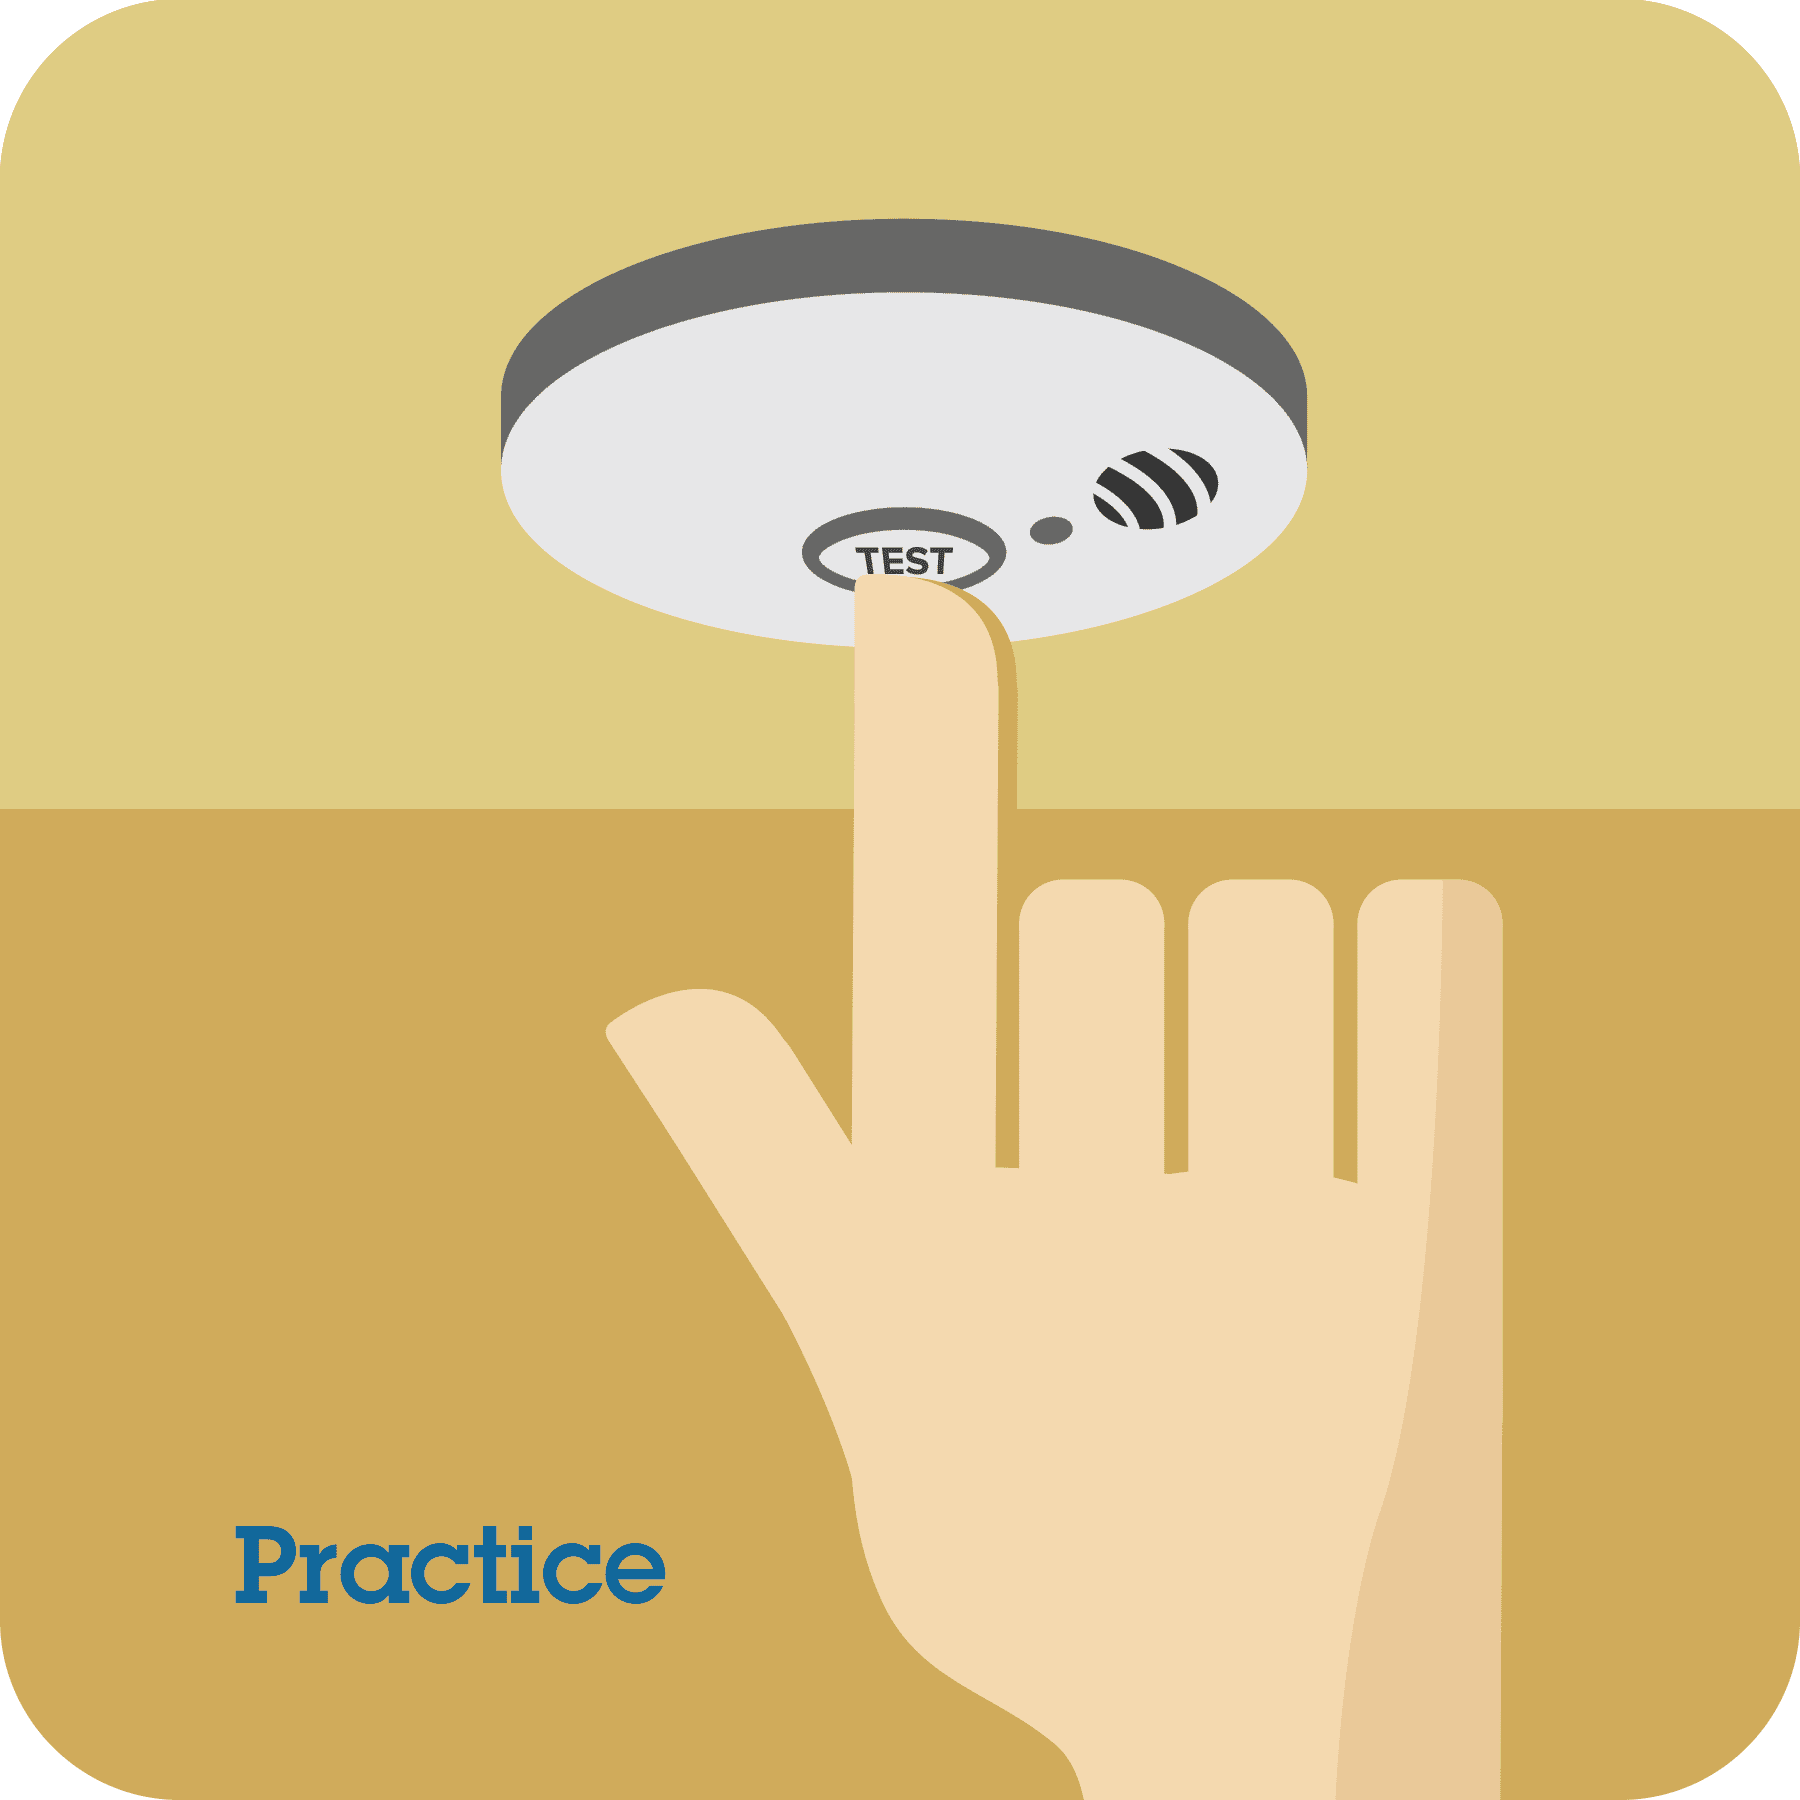 Hand pushing the test button on smoke alarm with prompt to practice.